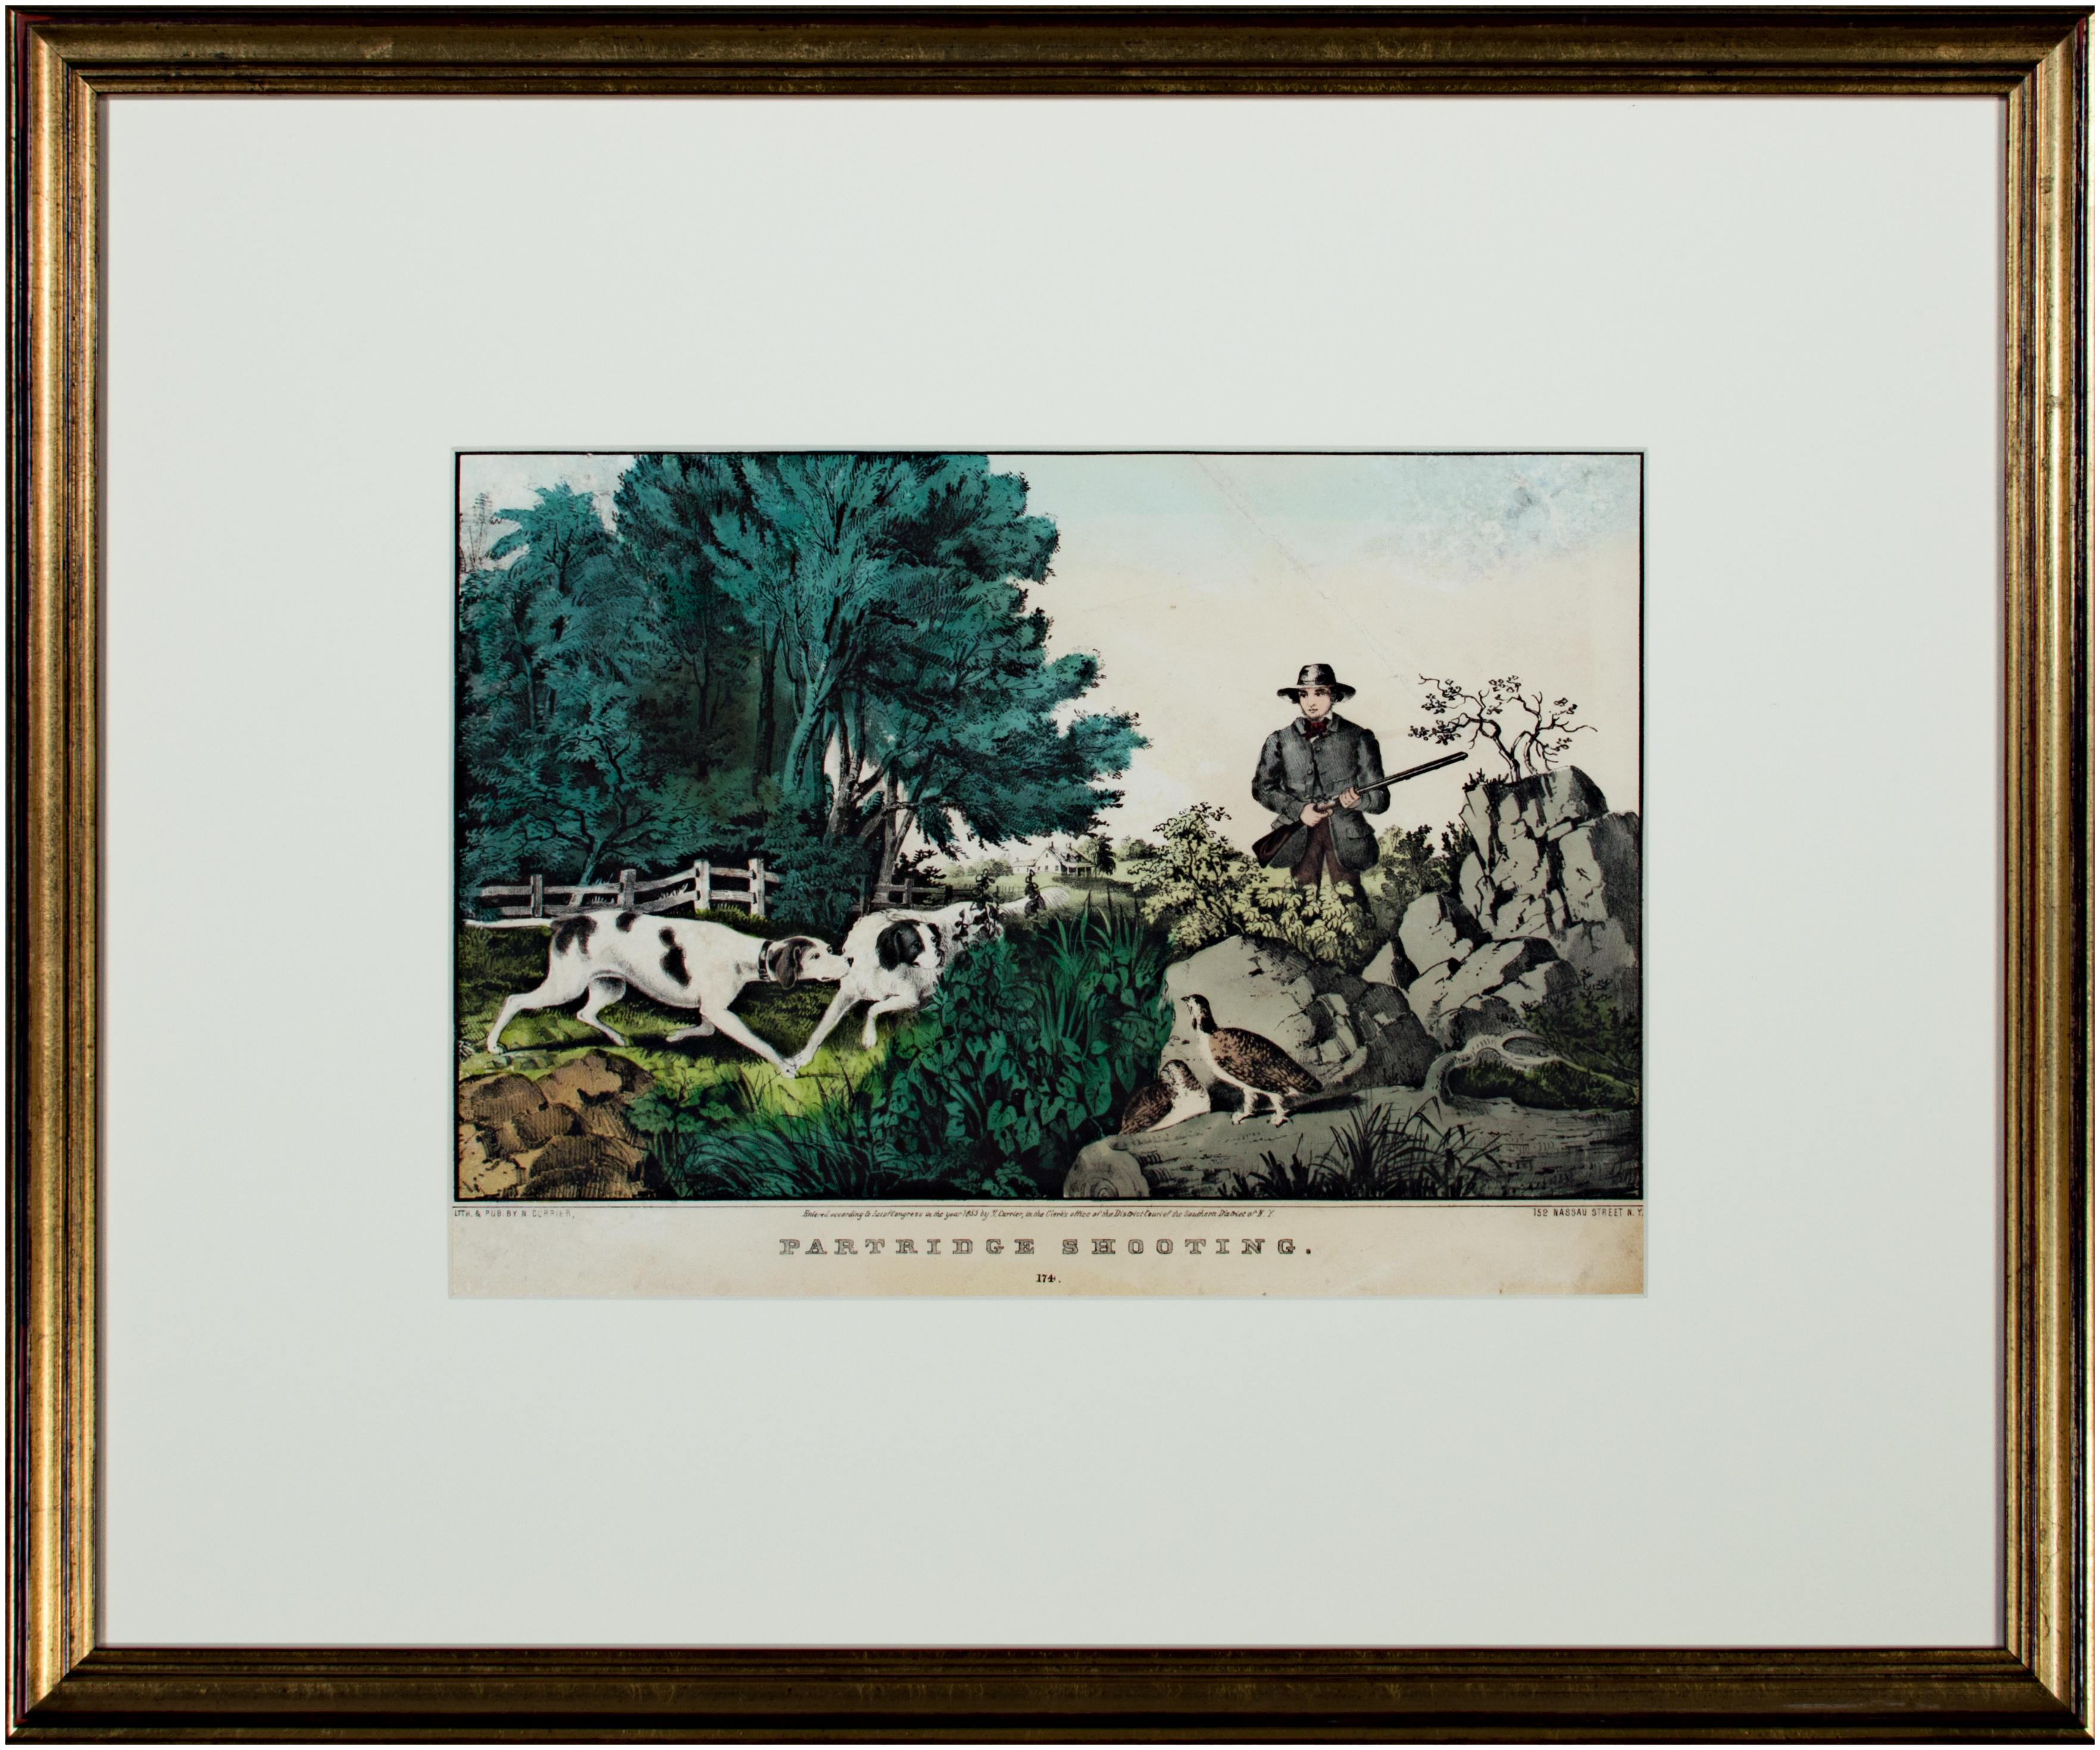 19th century color lithograph watercolor landscape figurative animal print - Print by Nathaniel Currier